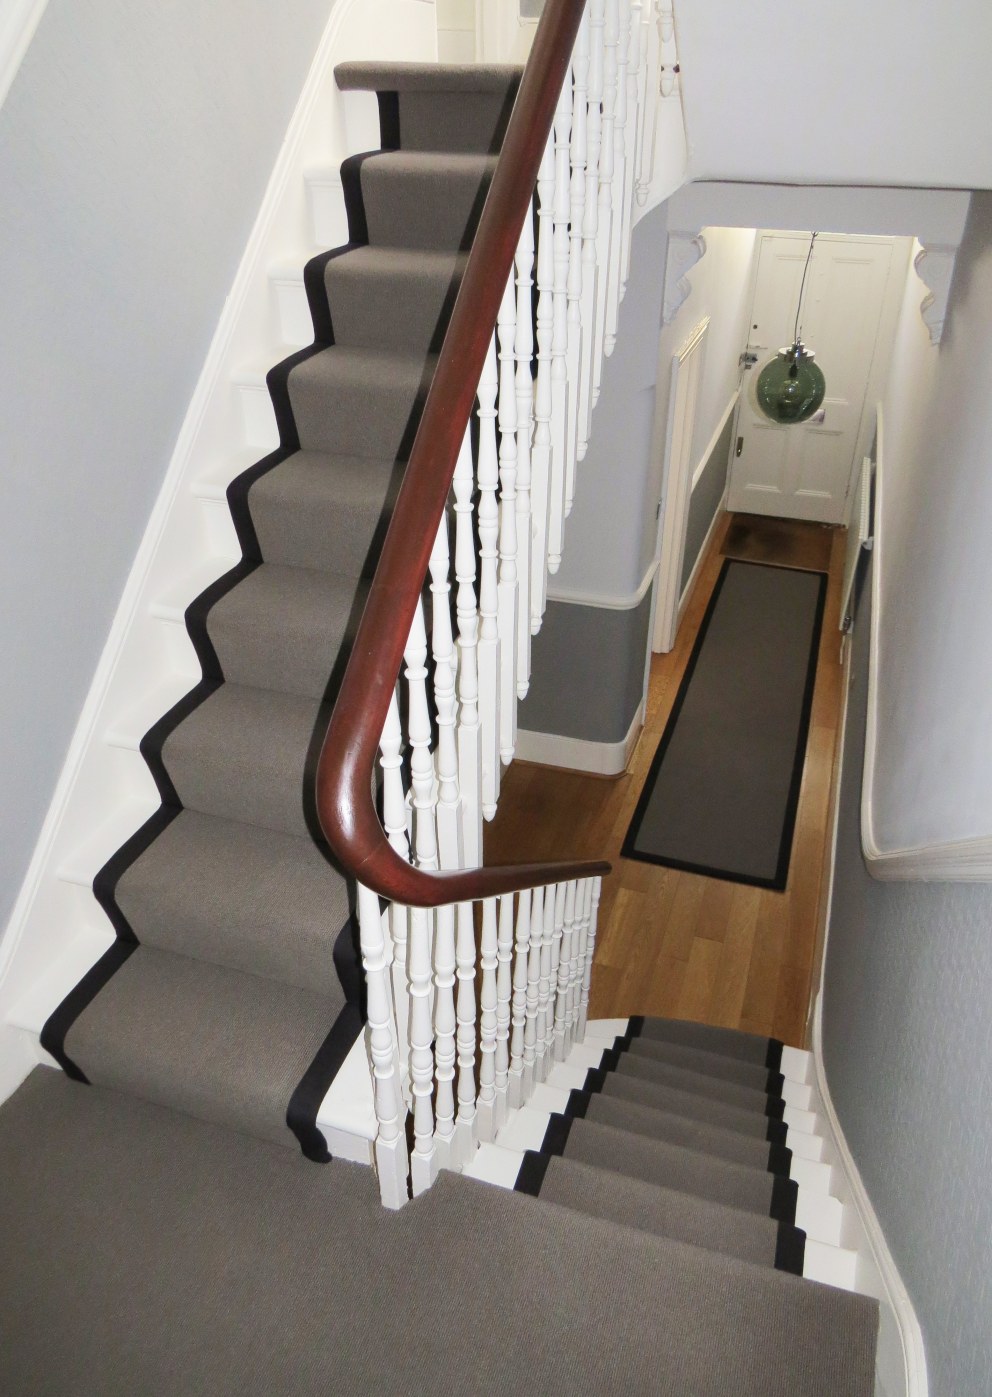 W12 home make-over | The once battered staircase and hallway became refined | Interior Designers